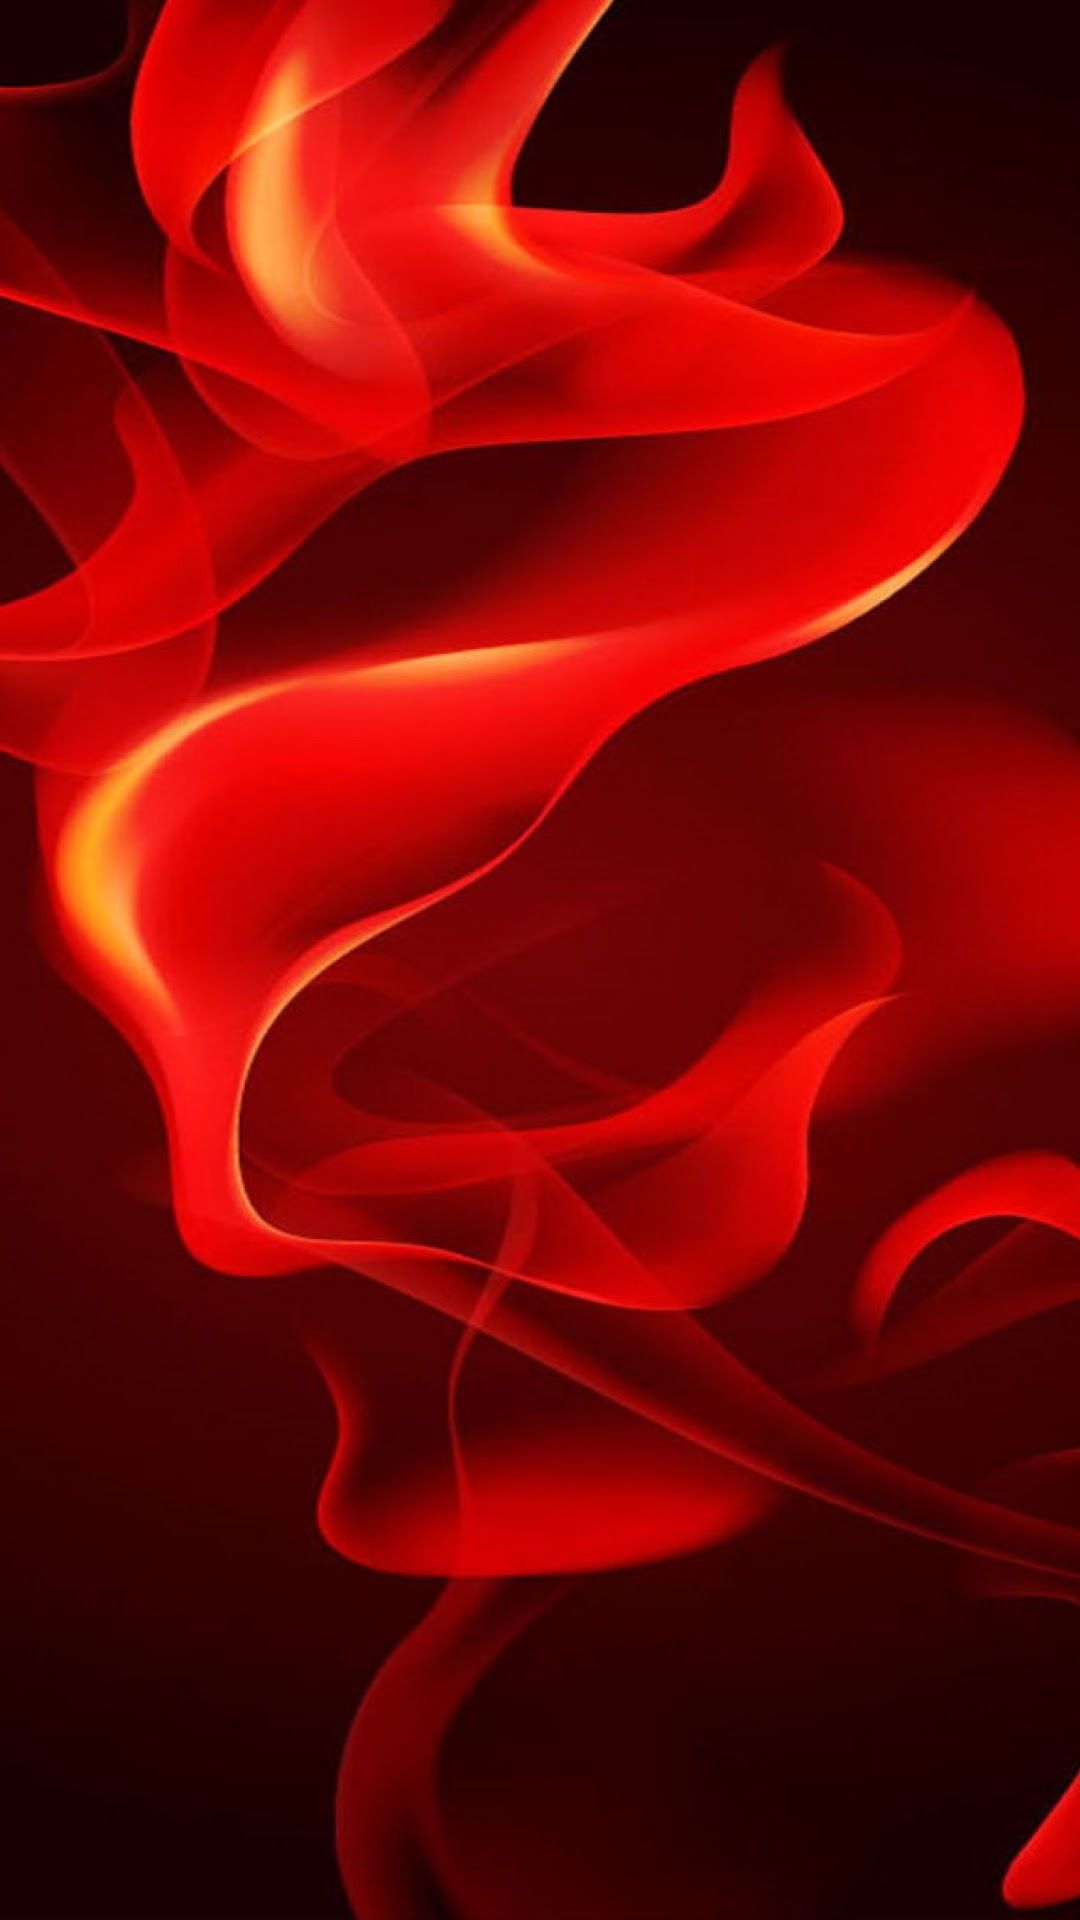 Android Best Wallpaper: Red Flame Android Best Wallpaper